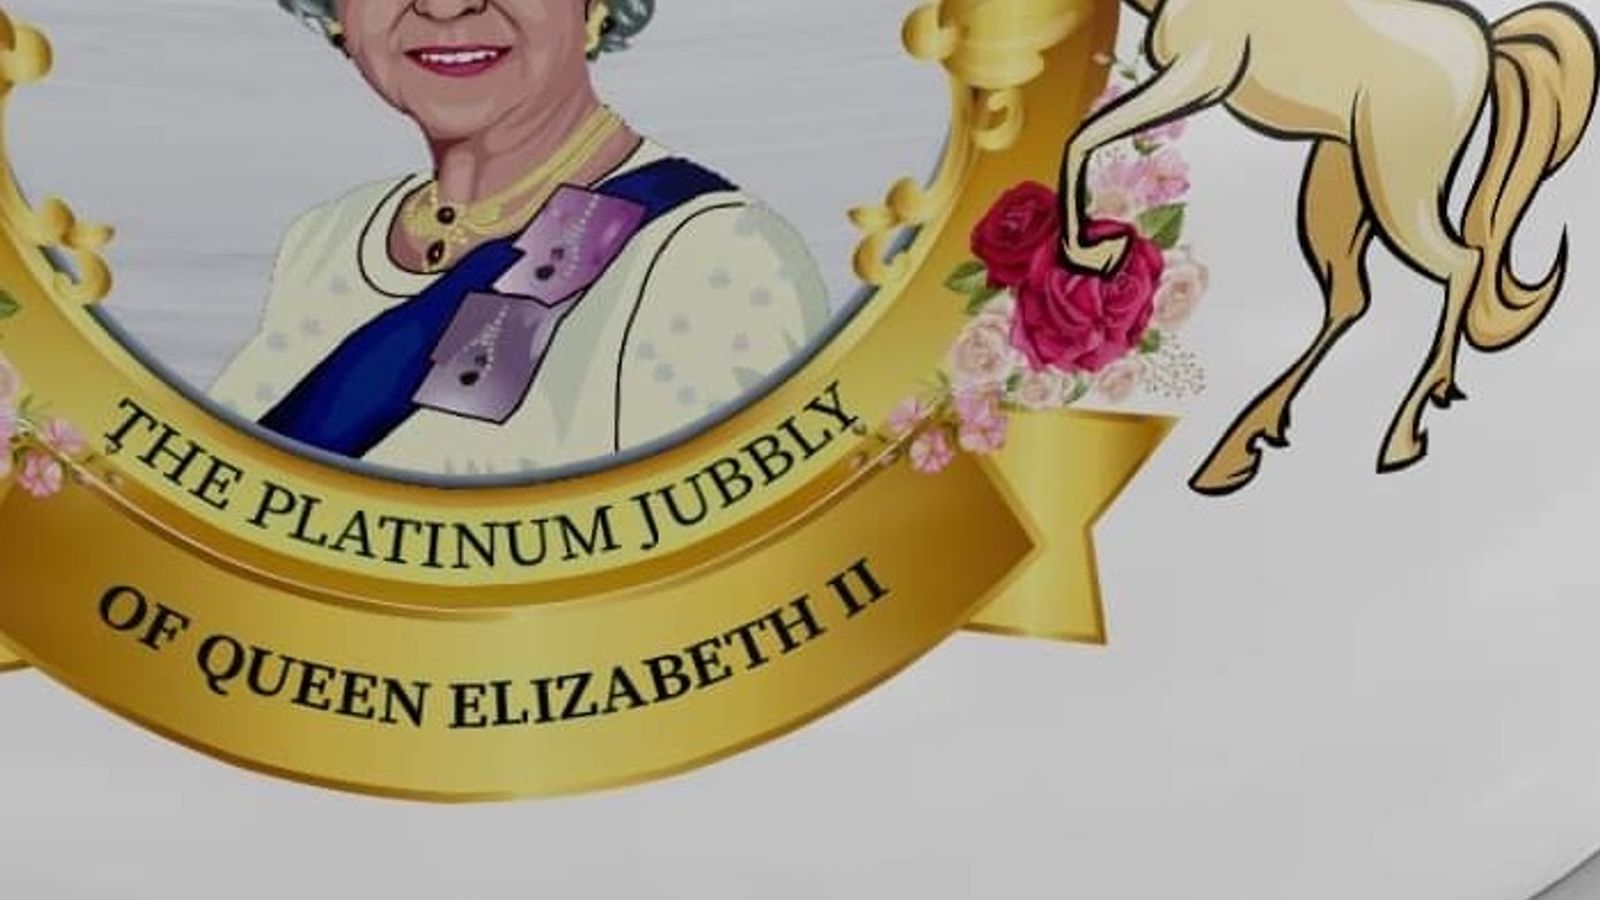 'Platinum Jubbly': The Queen's 70-year reign gets an Only Fools and Horses twist